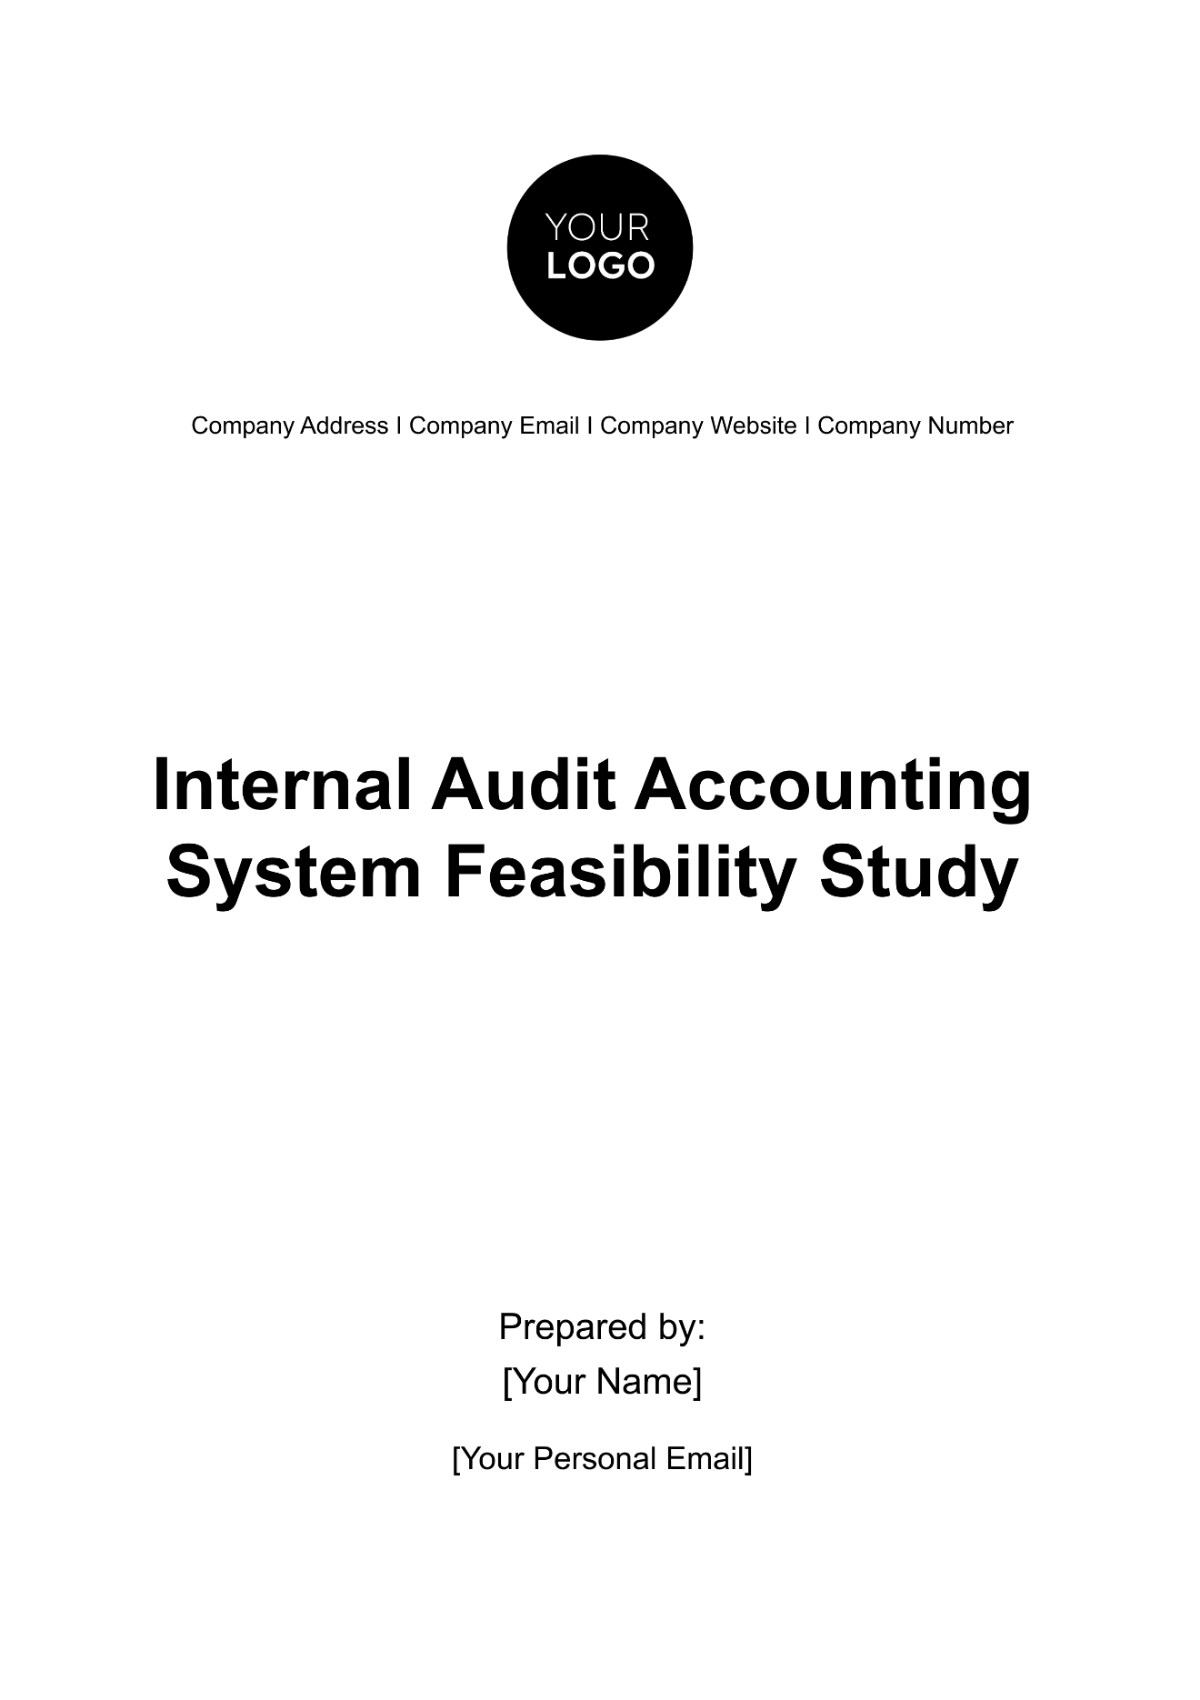 Internal Audit Accounting System Feasibility Study Template